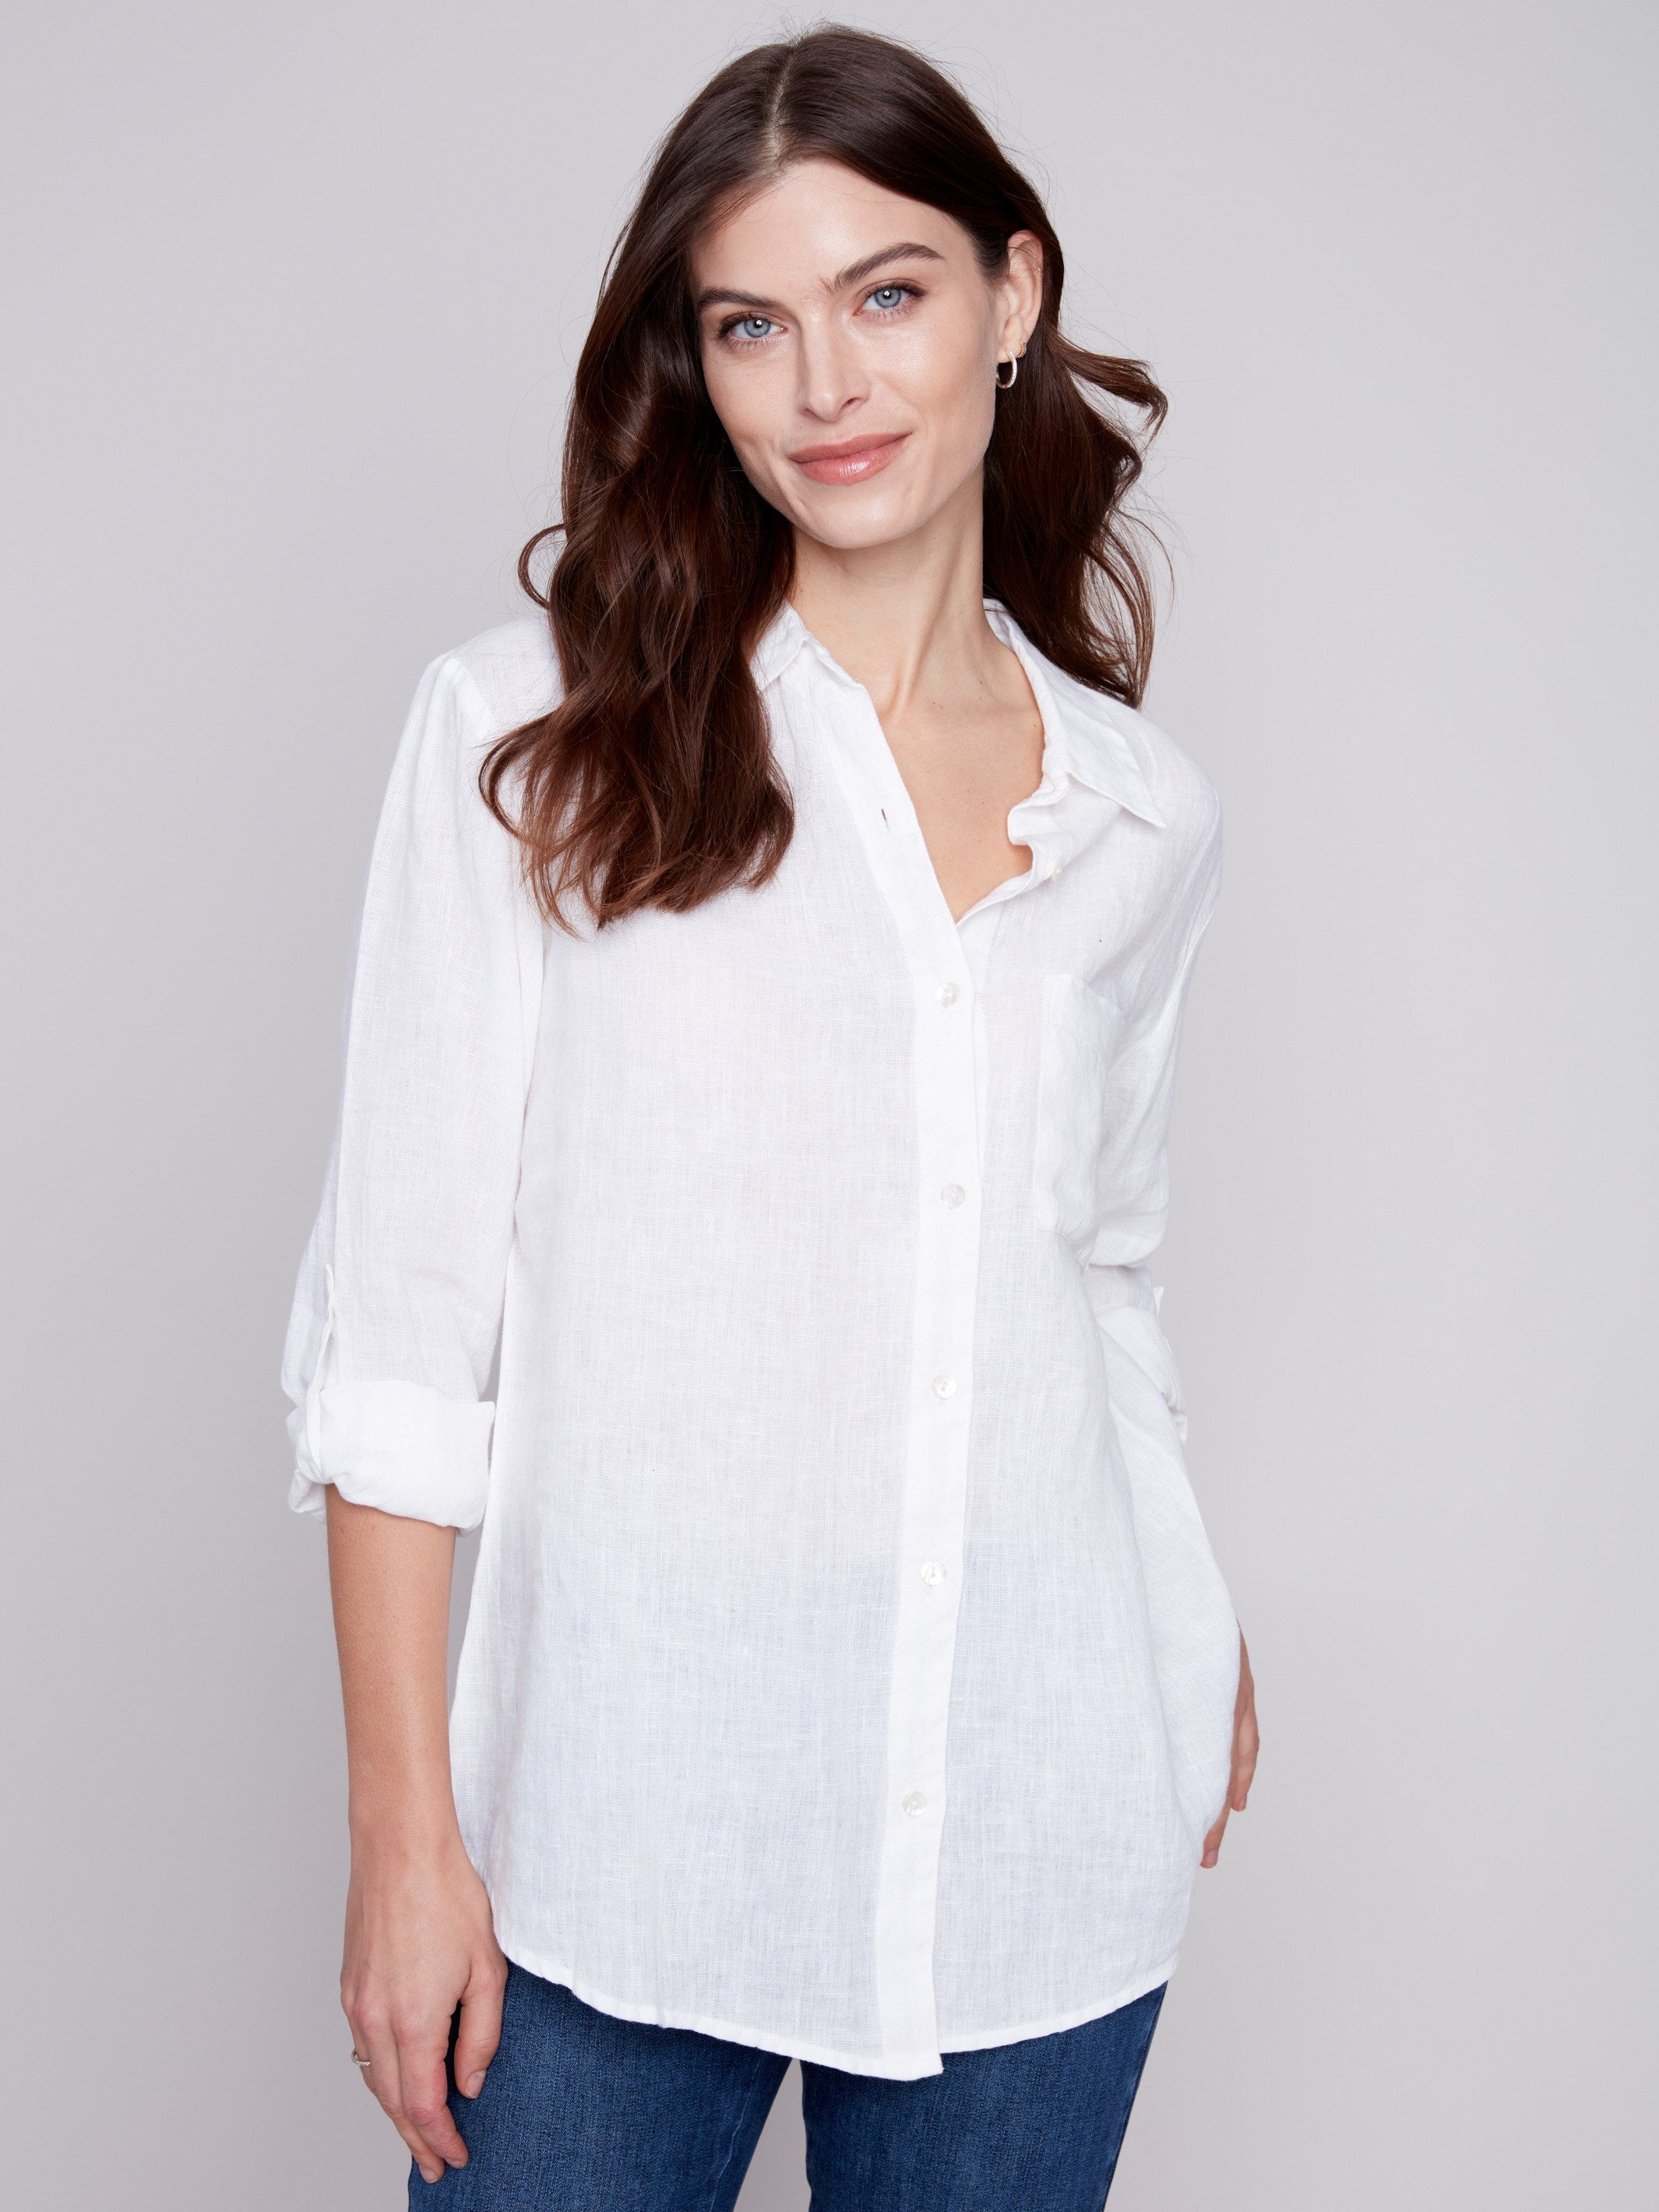 Long Linen Shirt - White - Charlie B Collection Canada - Image 5